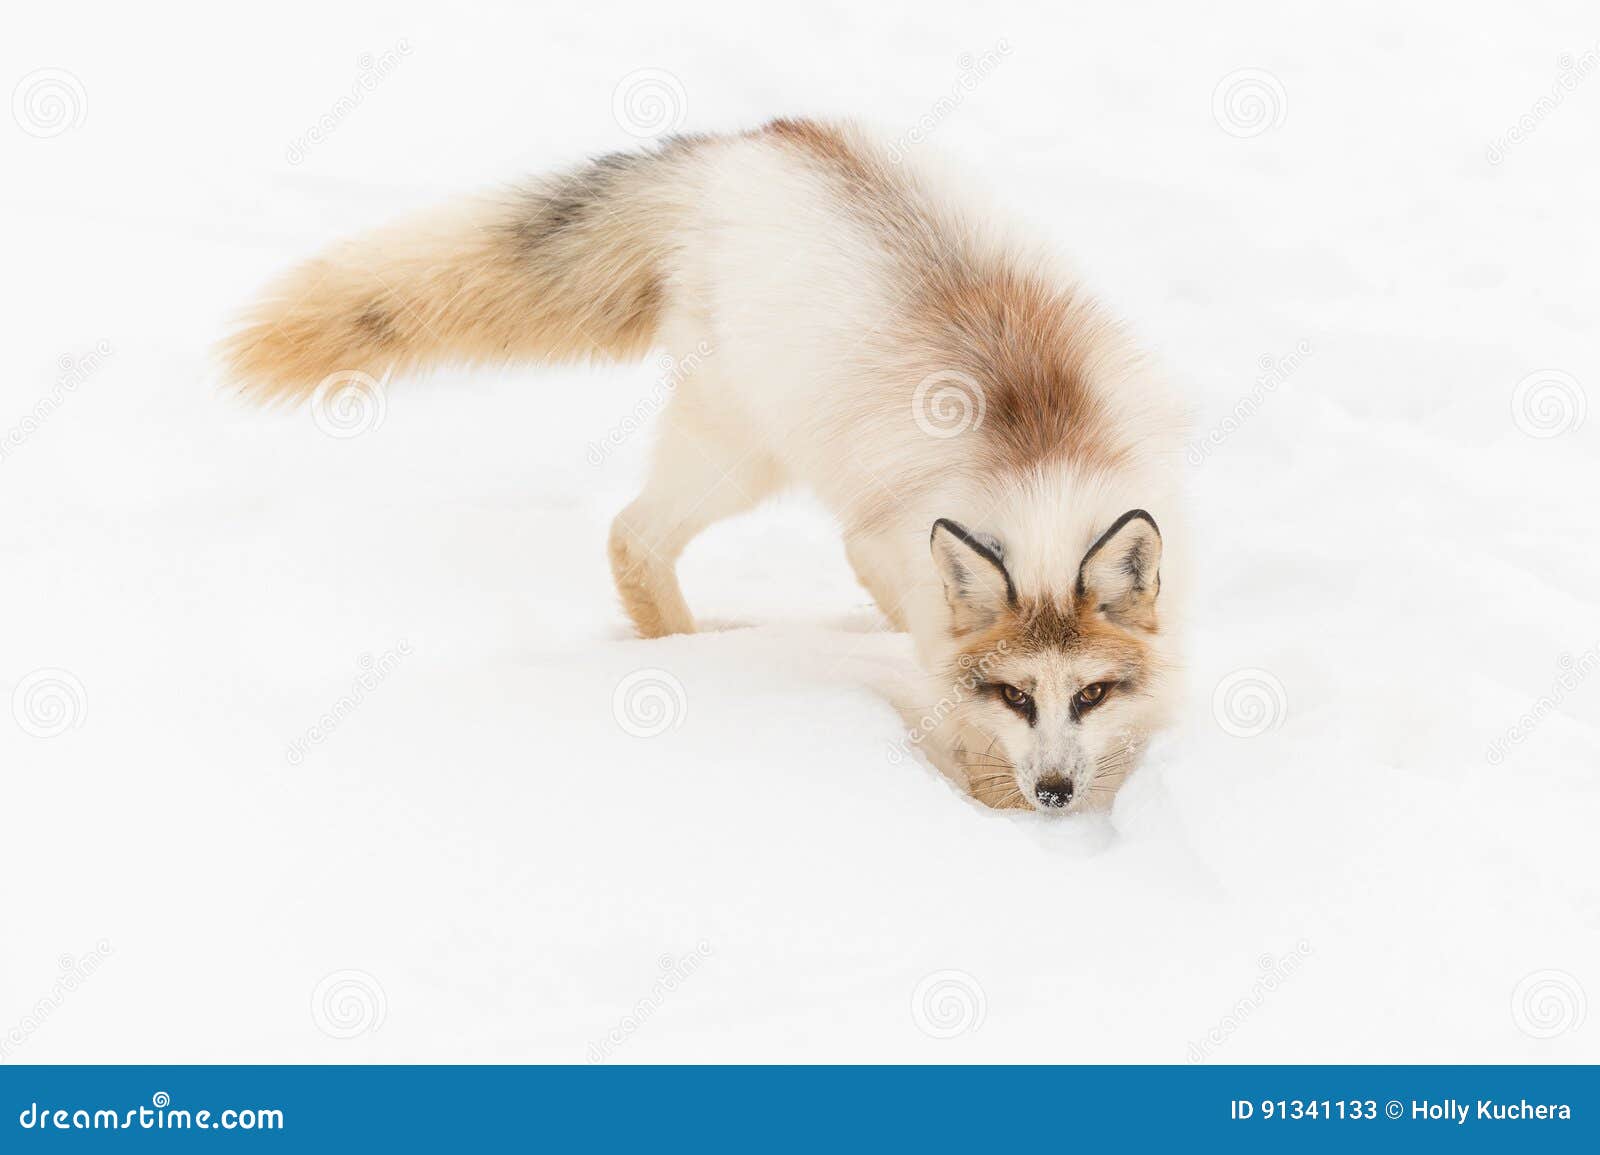 red marble fox vulpes vulpes digs in snow